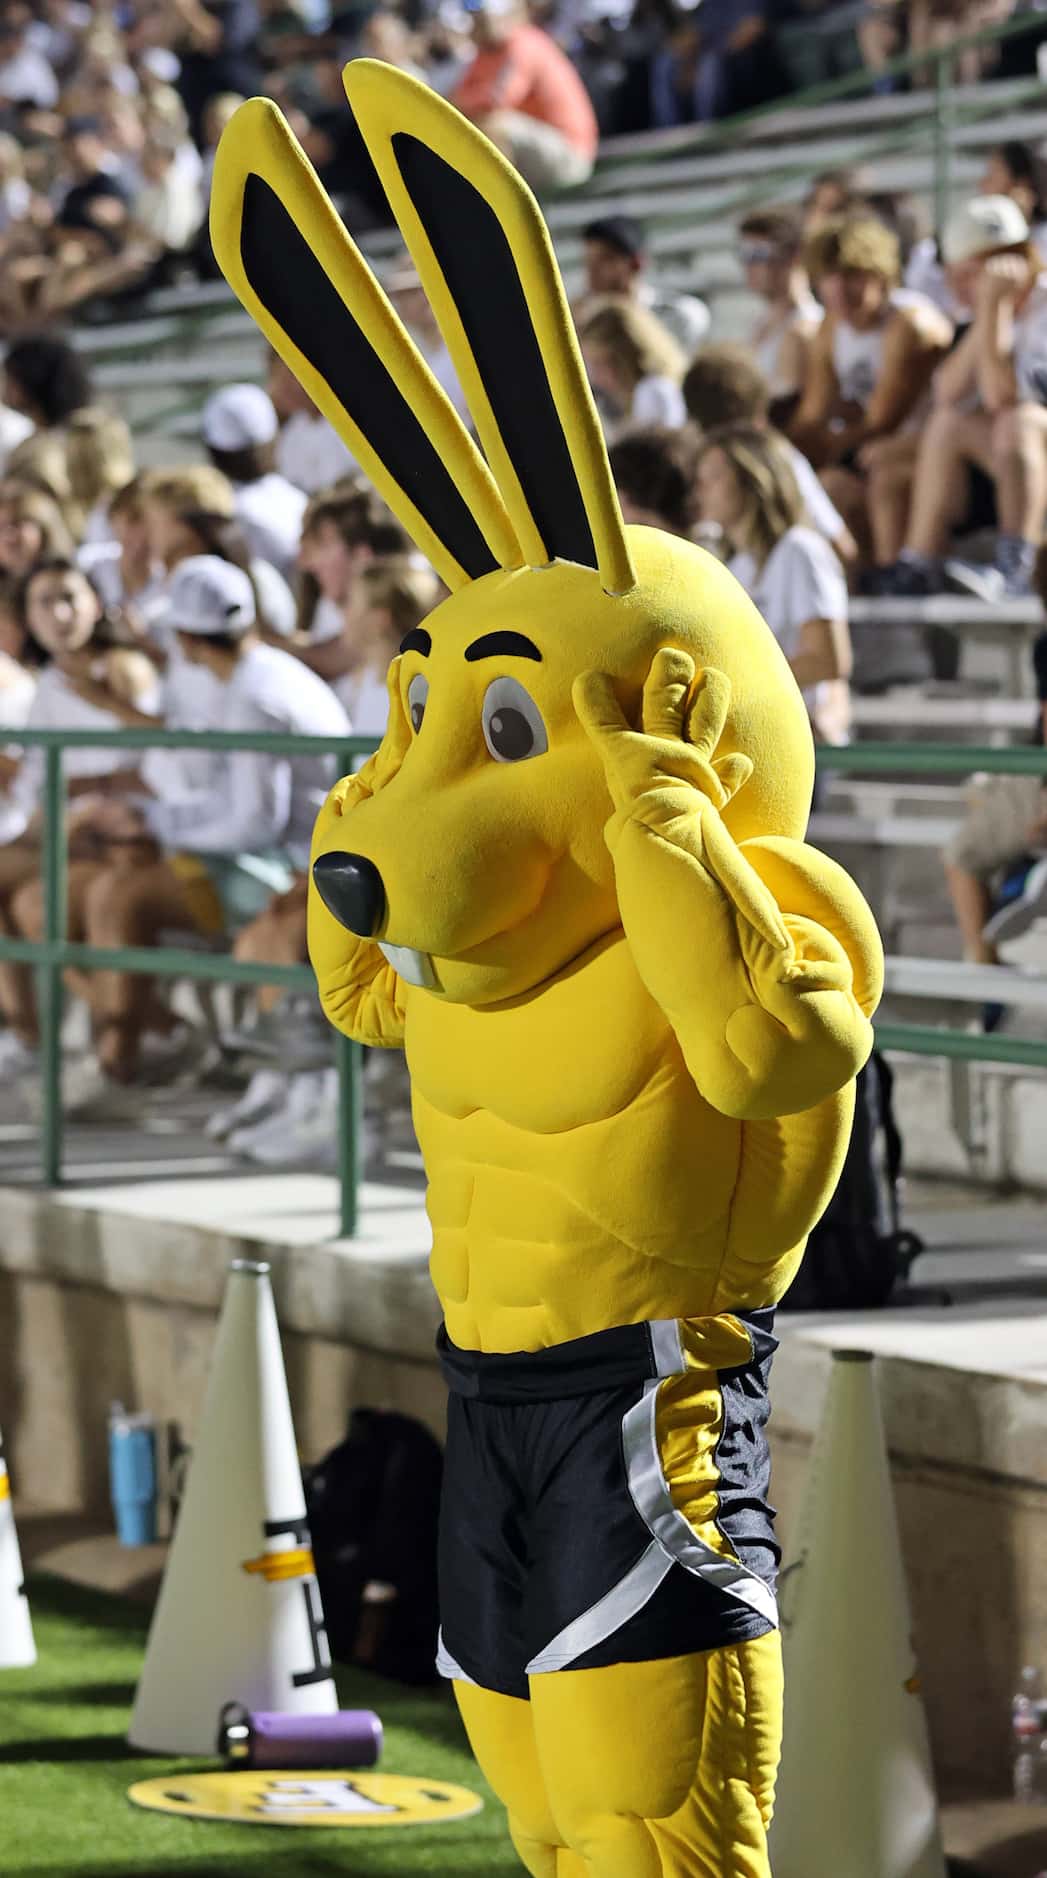 The Forney high Jackrabbit mascot can’t seem to believe it, as the team pulls ahead of...